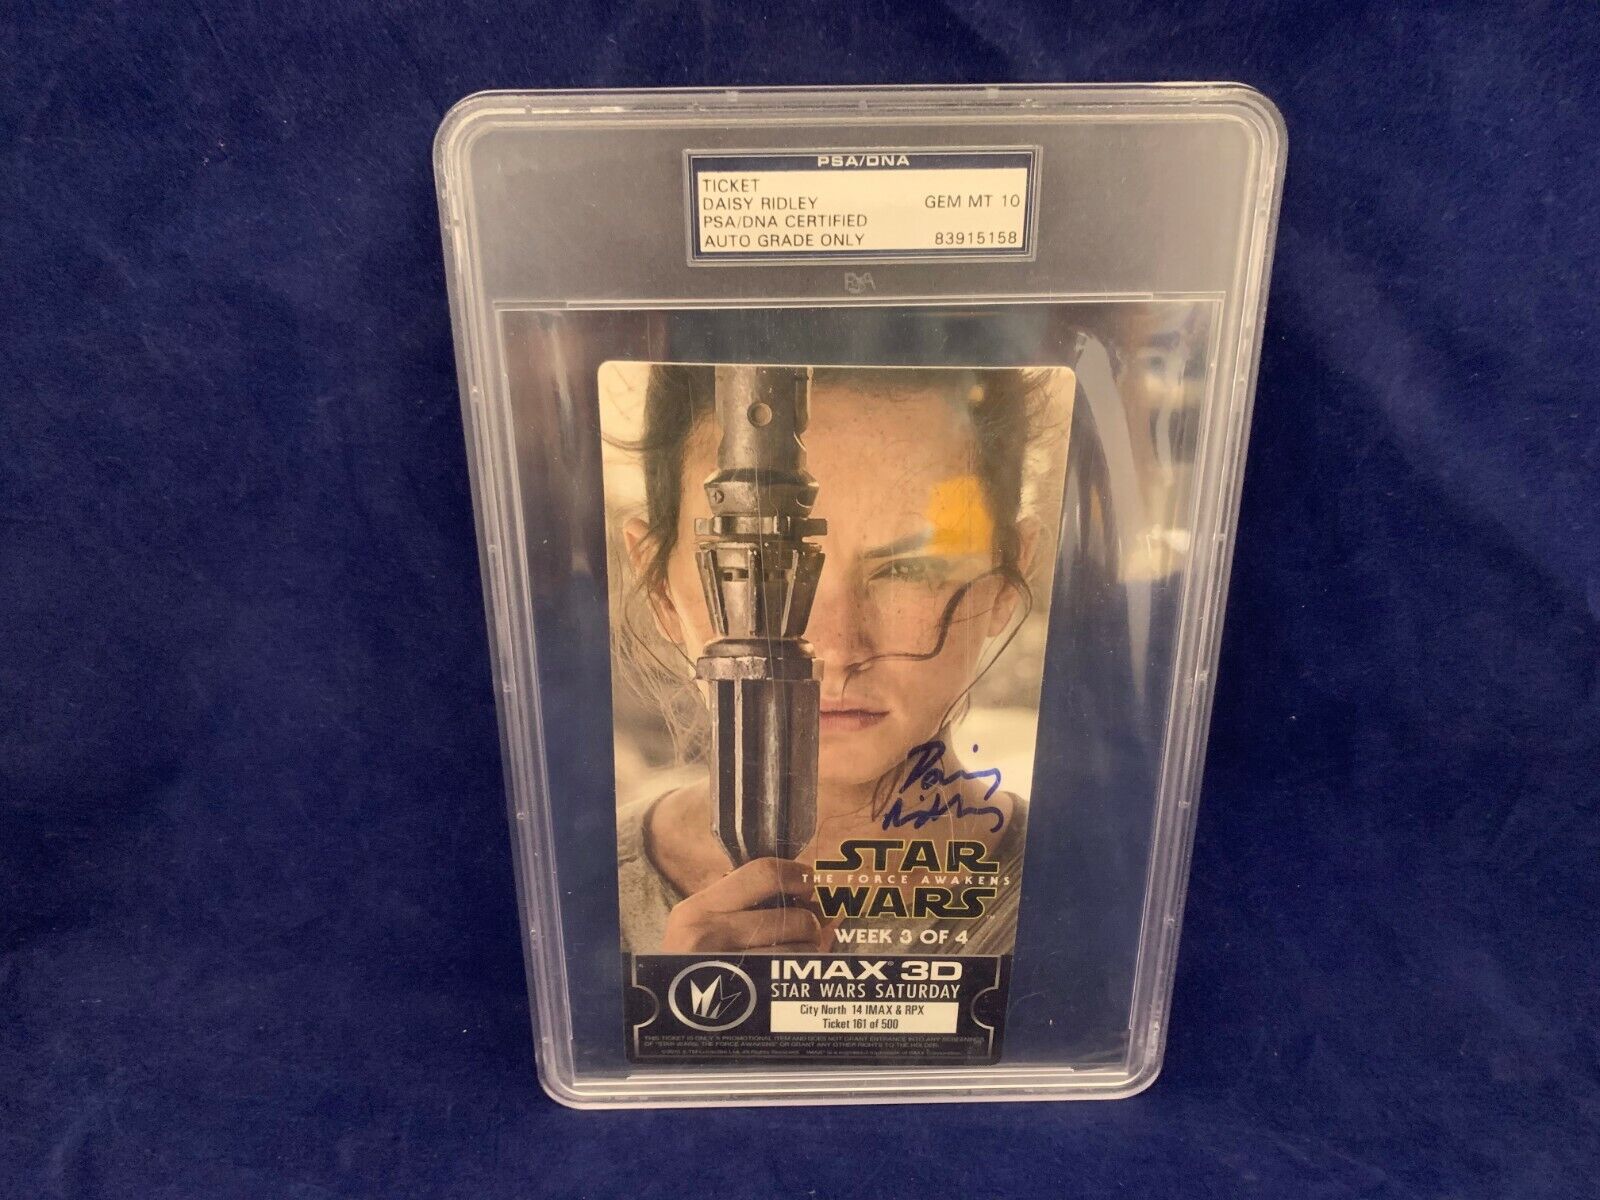 Daisy Ridley Signed Star Wars Force Awakens Imax Ticket PSA DNA Auto Only